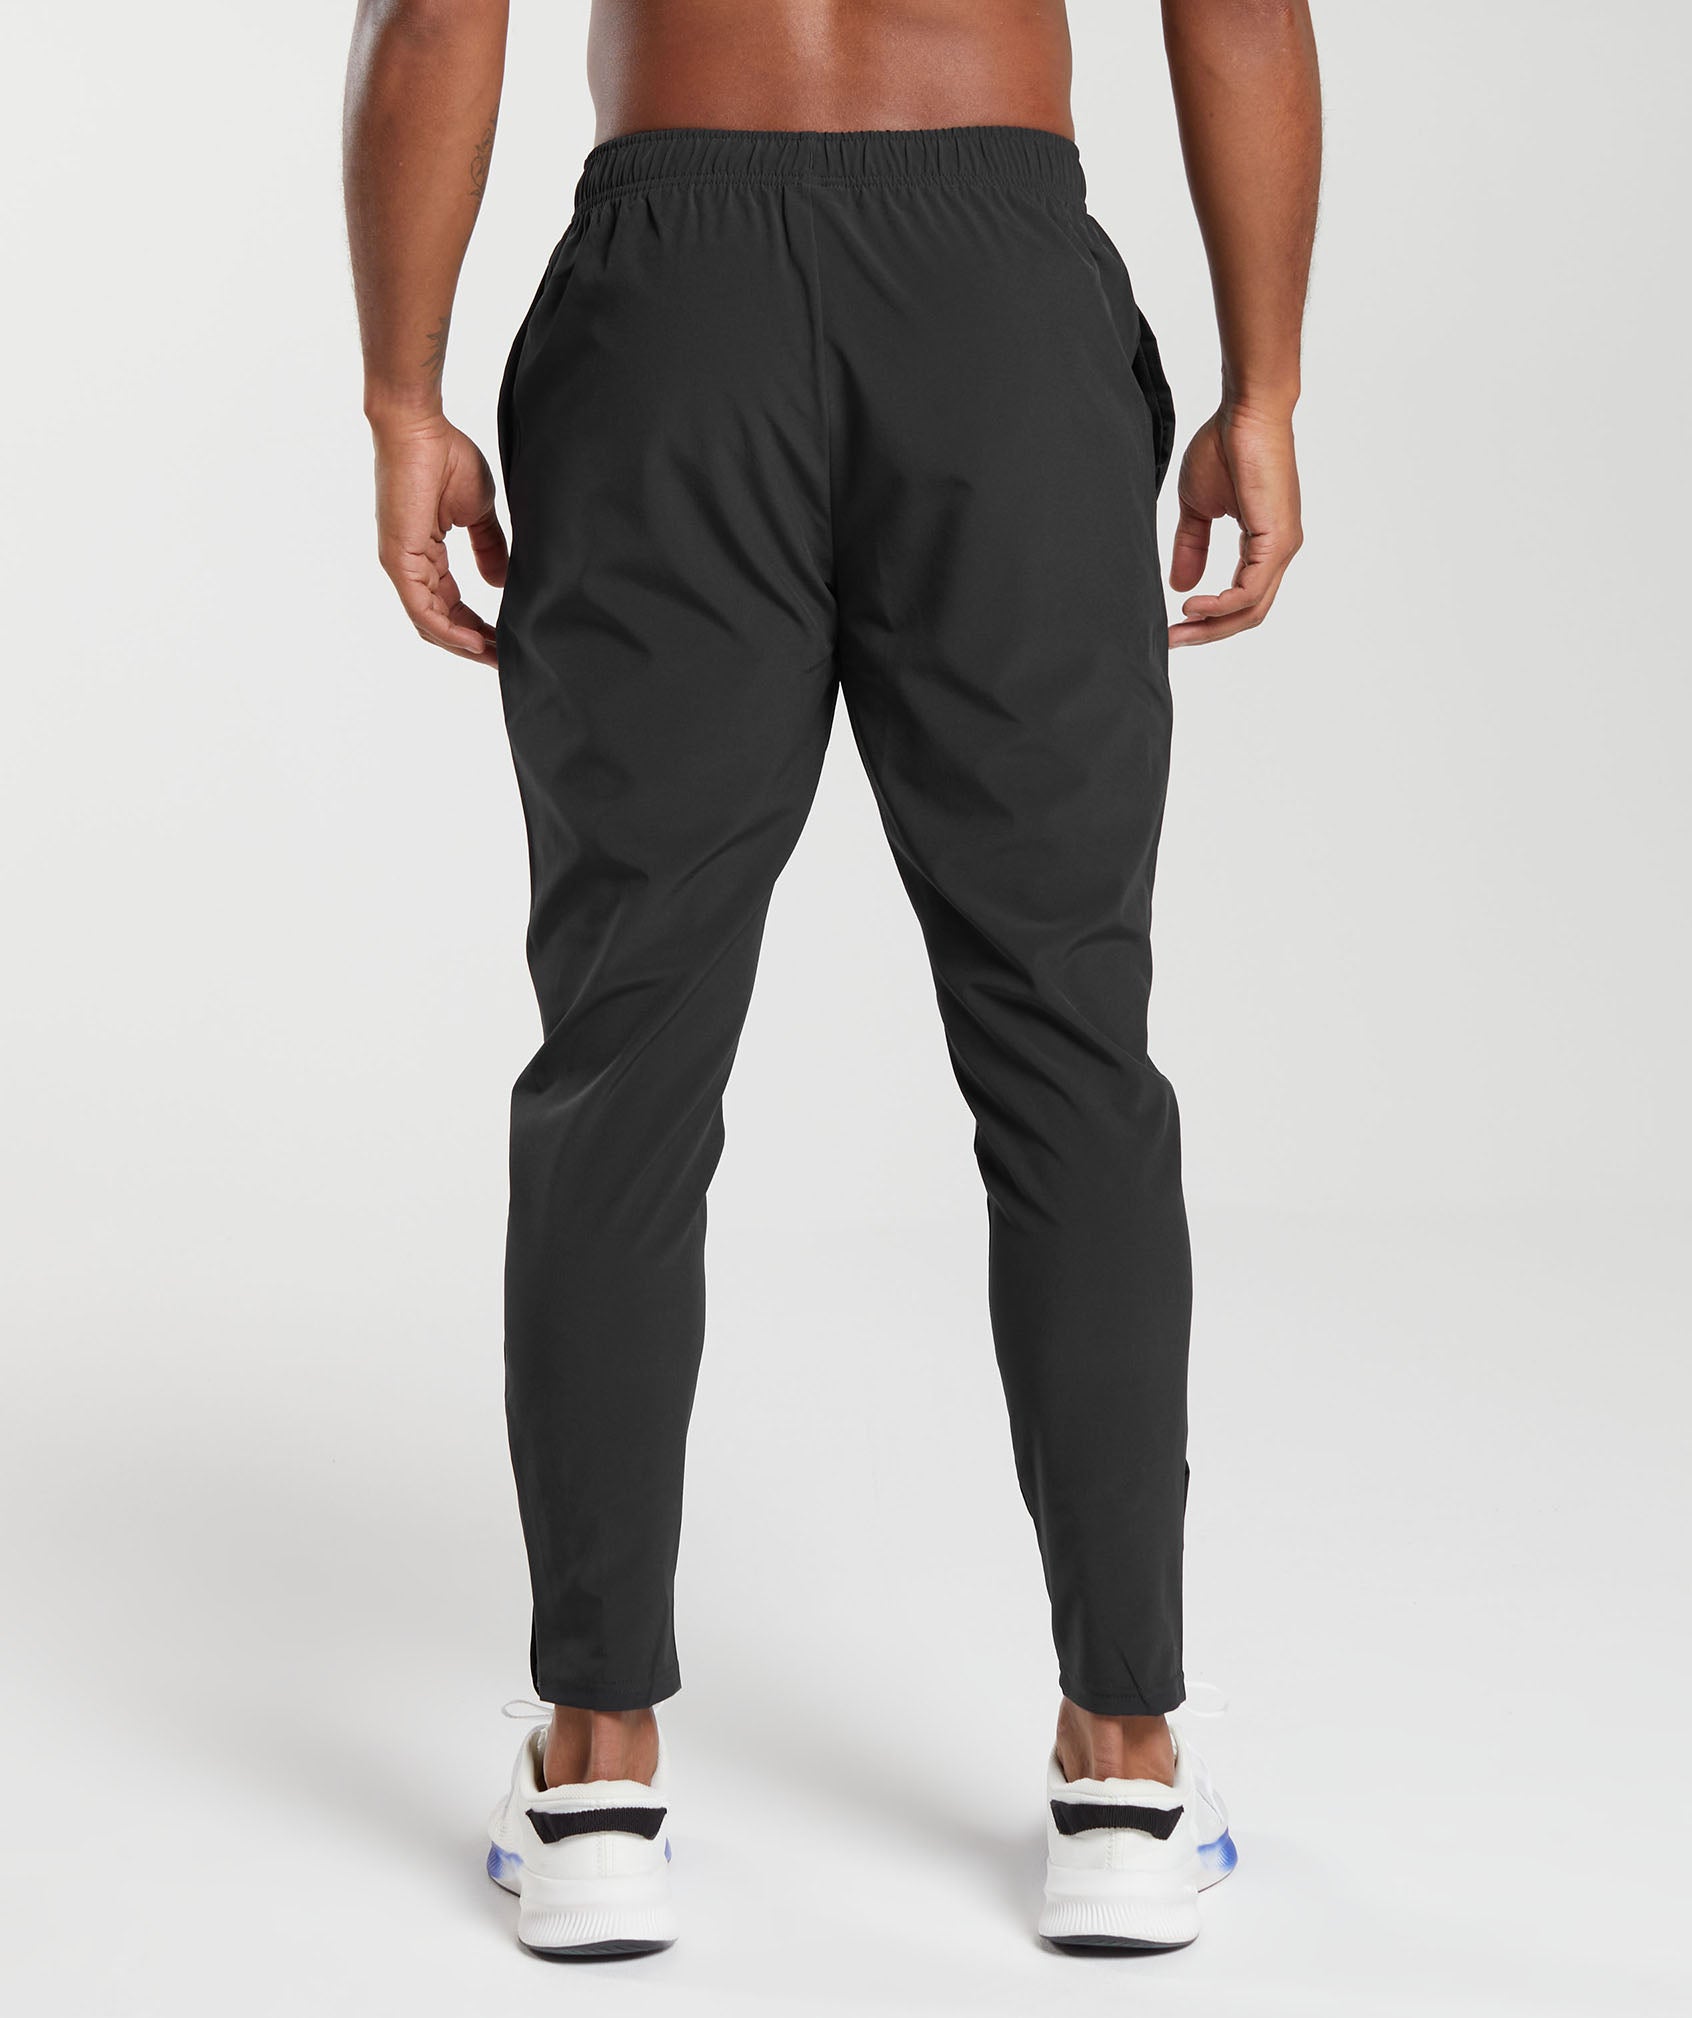 Arrival Woven Joggers in Black - view 2